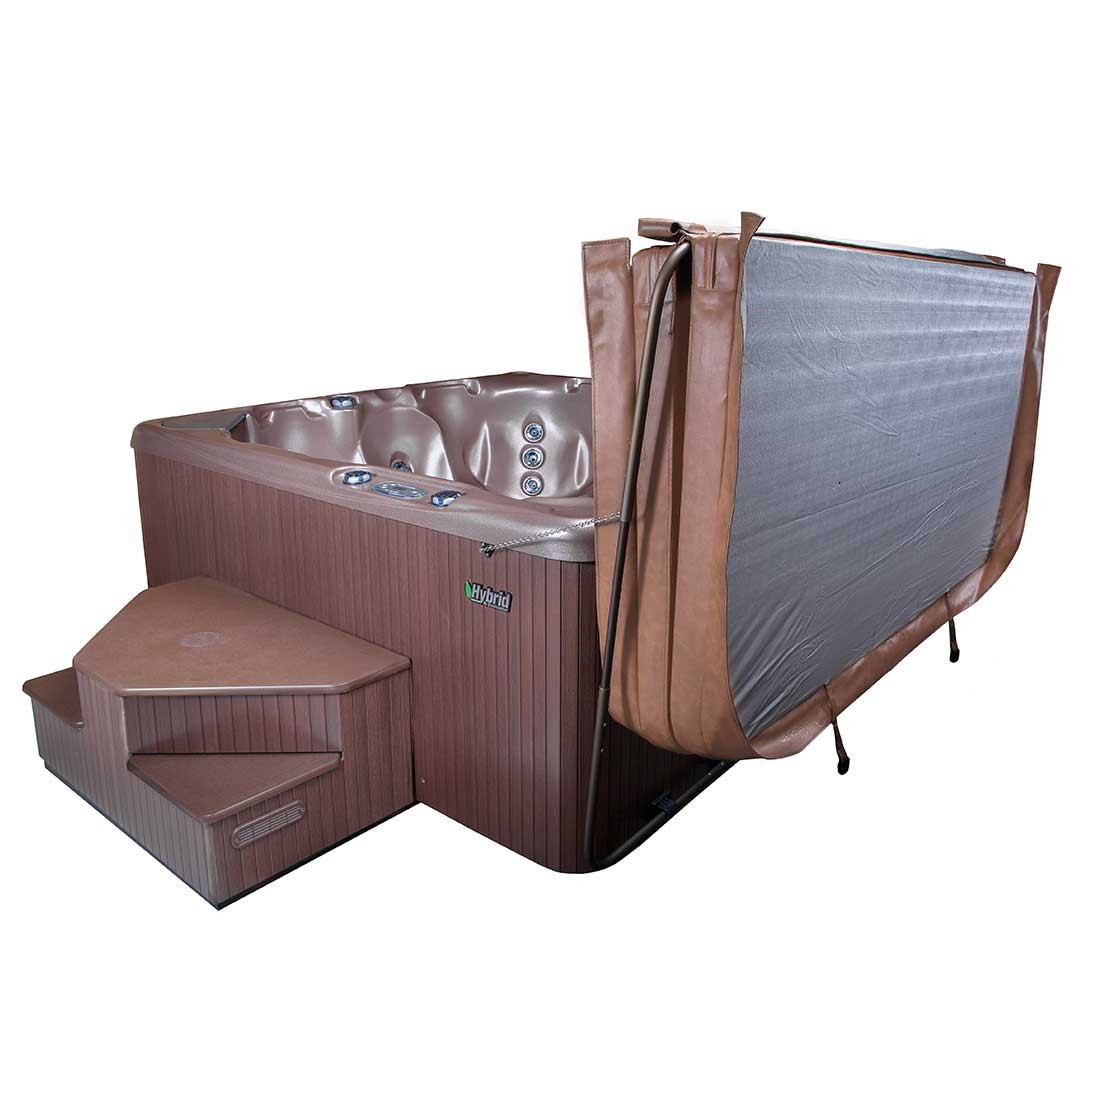 Beachcomber Lift 'n Store Hot Tub Cover Fully Open